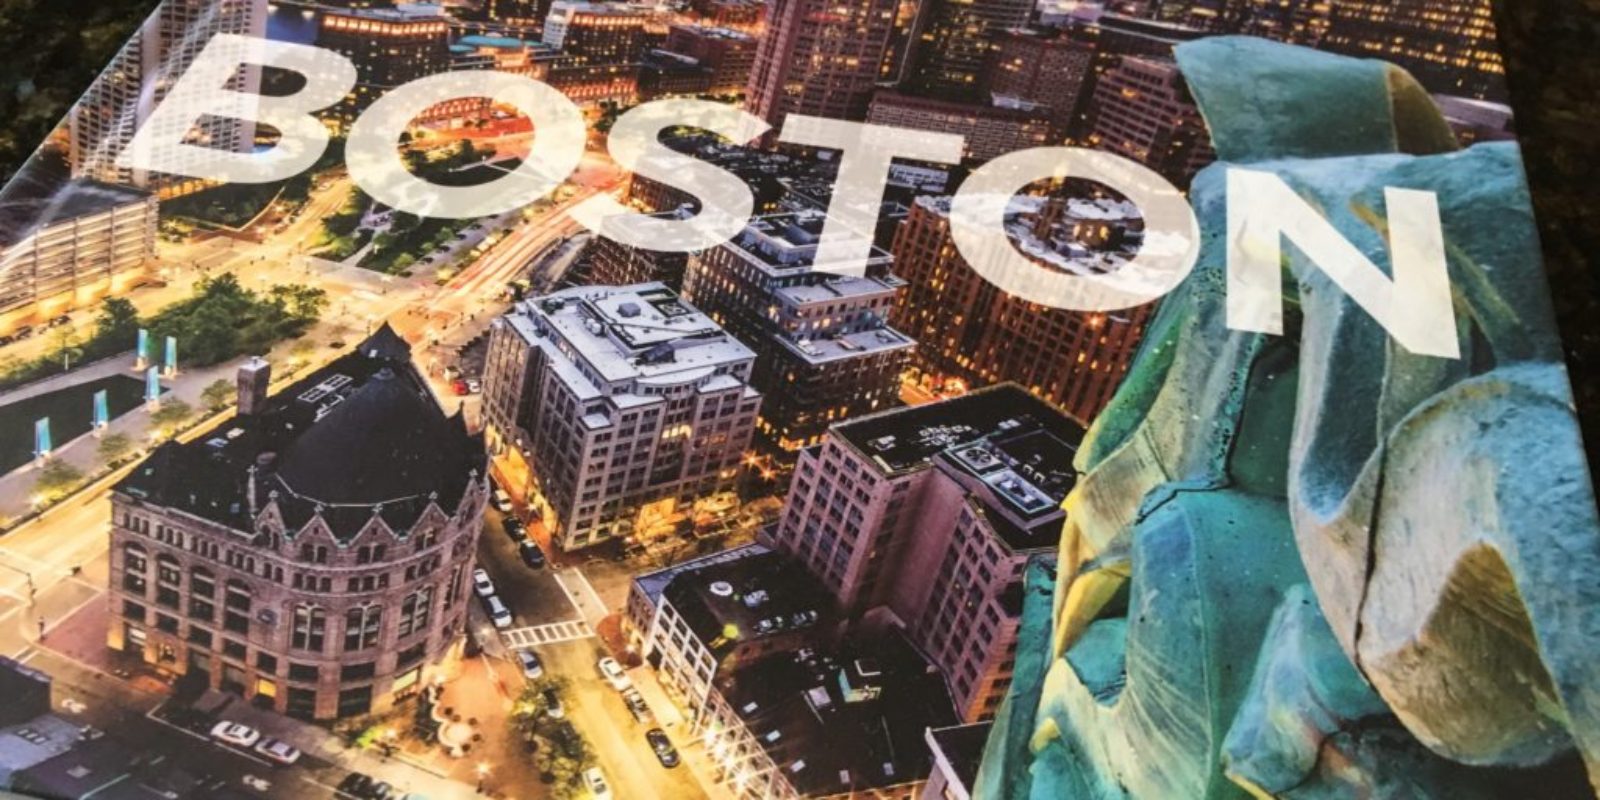 Boston is a great city, but where is the best place to stay? There are great Boston hotels, from budget to luxury, in neighbourhoods like Back Bay and the Seaport.